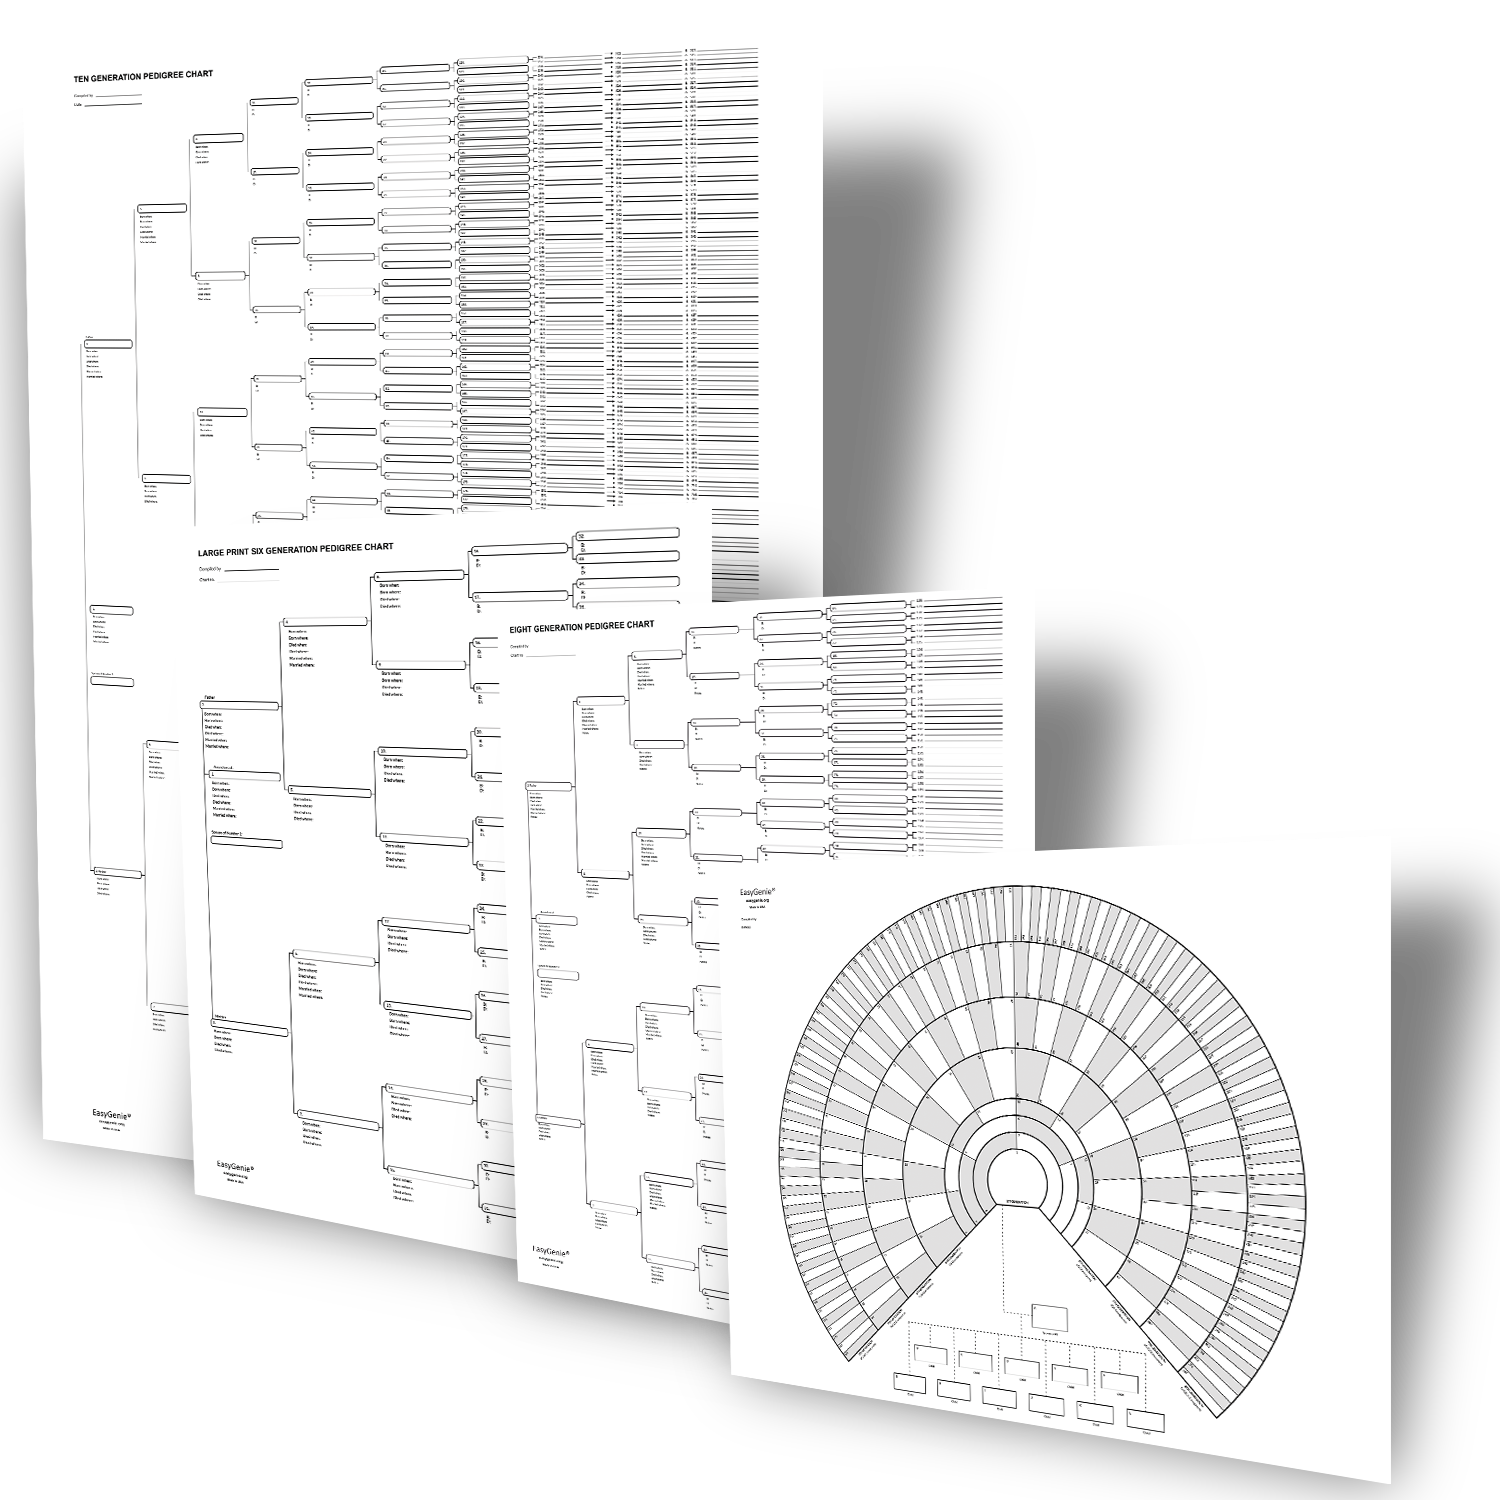 EASYGENIE Genetic Genealogy Triangulation Kit for DNA Tests and Ancestry Research